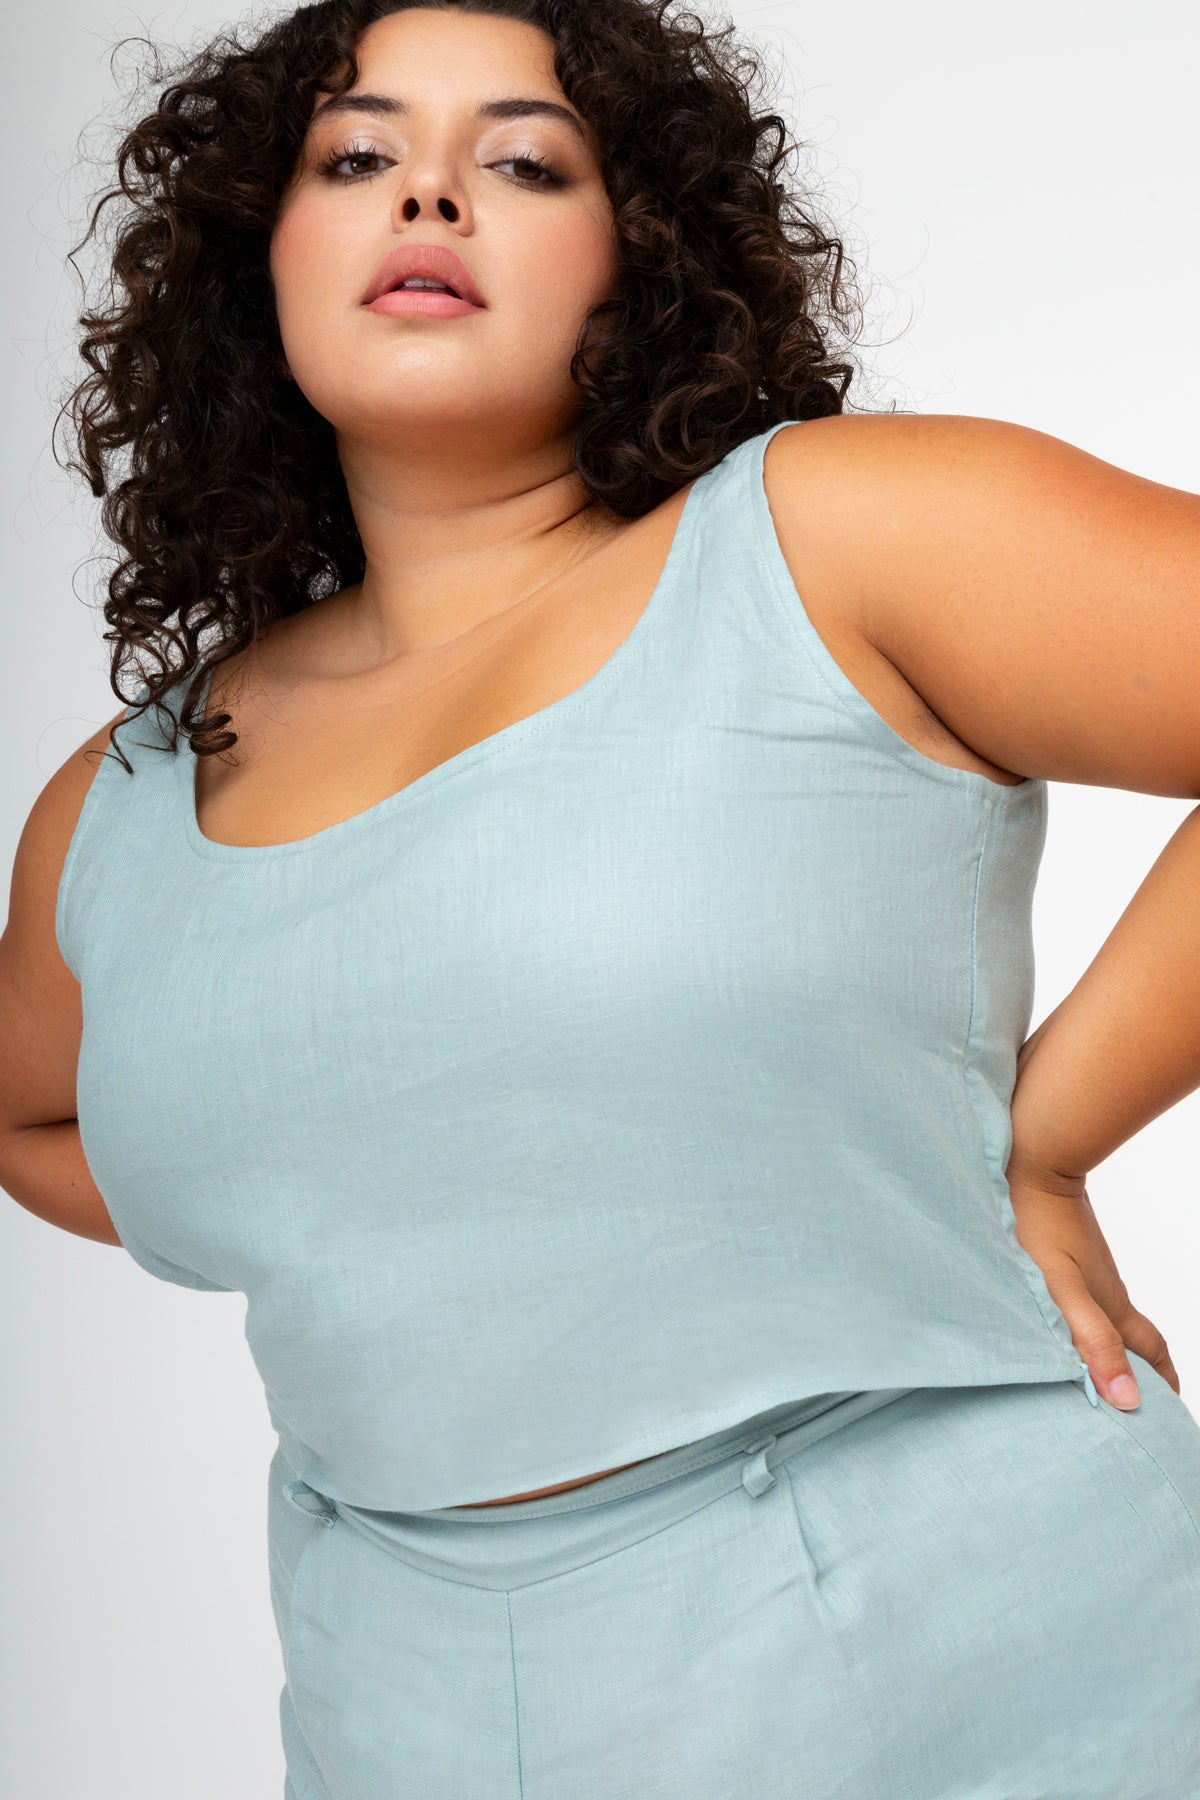 Blue linen tank top paired with blue linen shorts for plus sized or extended sizing.